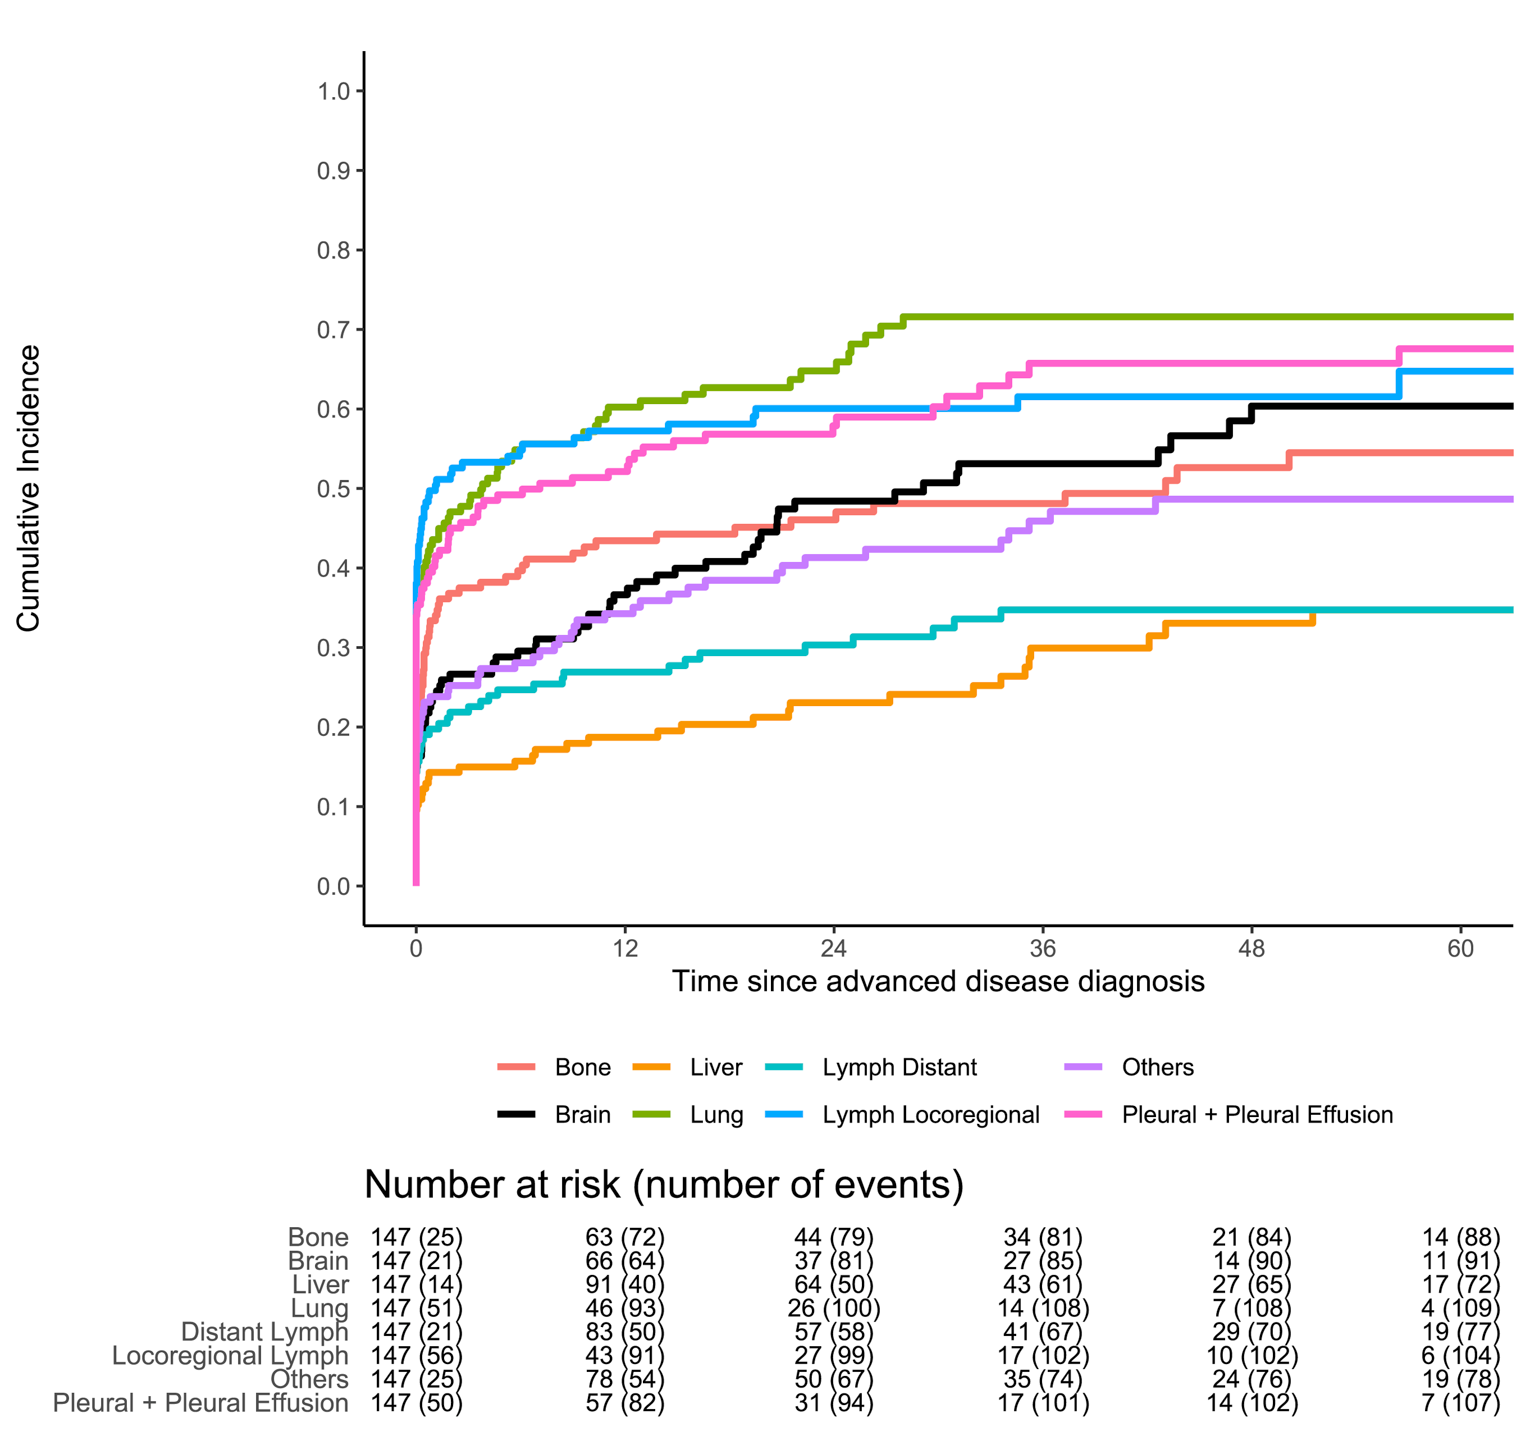 Cumulative Incidence Plots of Various Metastatic Disease Sites (bone, liver, lymph, brain, lung, etc) in Canadian ALK-Positive NSCLC Patients. Time 0 Is the Date of Diagnosis of Incurable Disease.